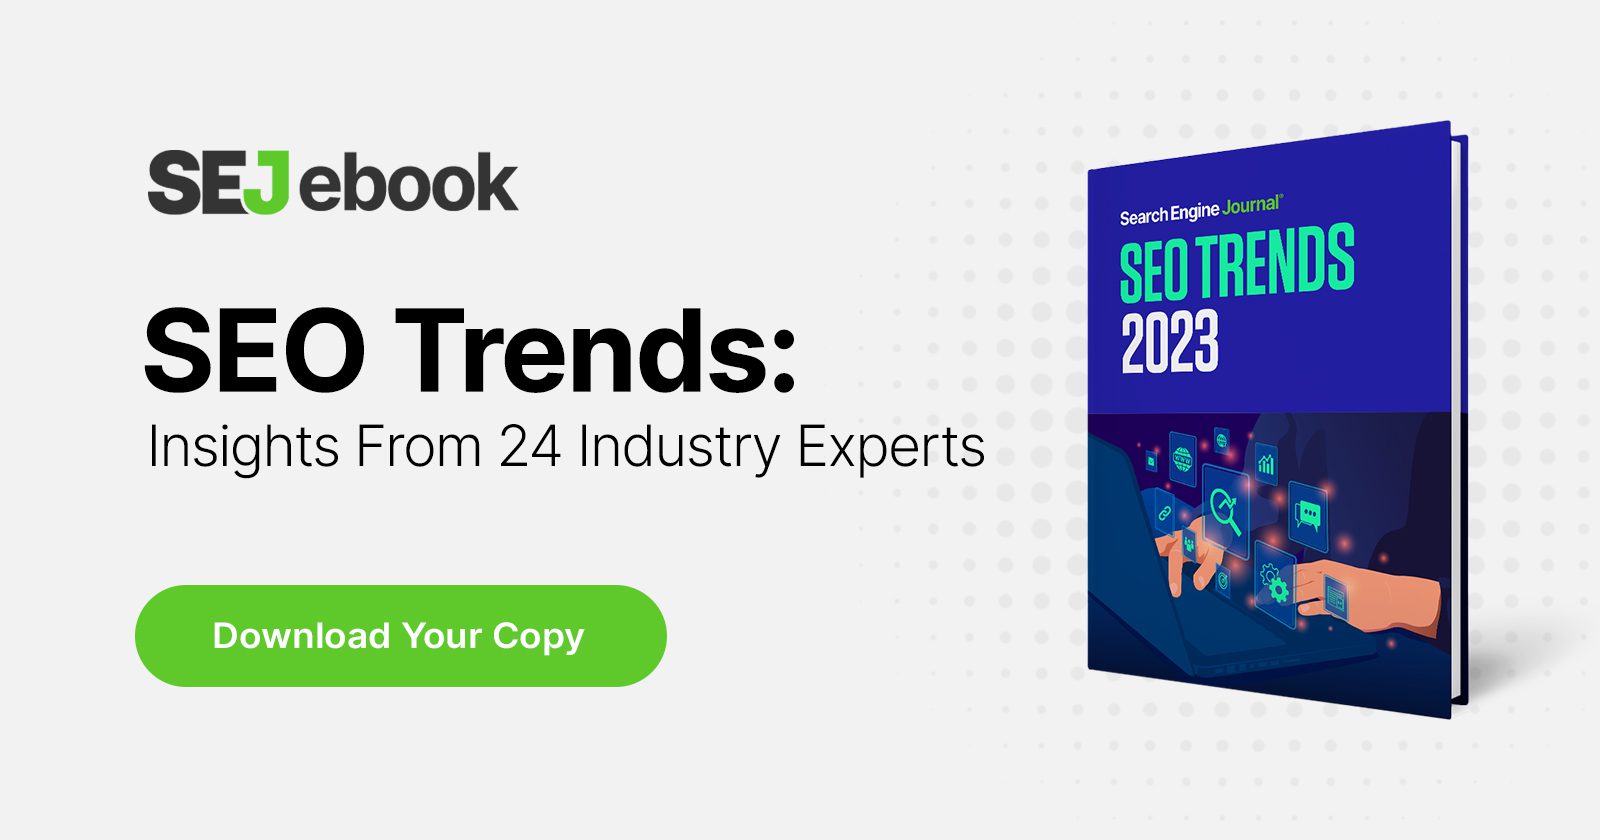 SEO Trends 2023, According To 24 Experts [Ebook]